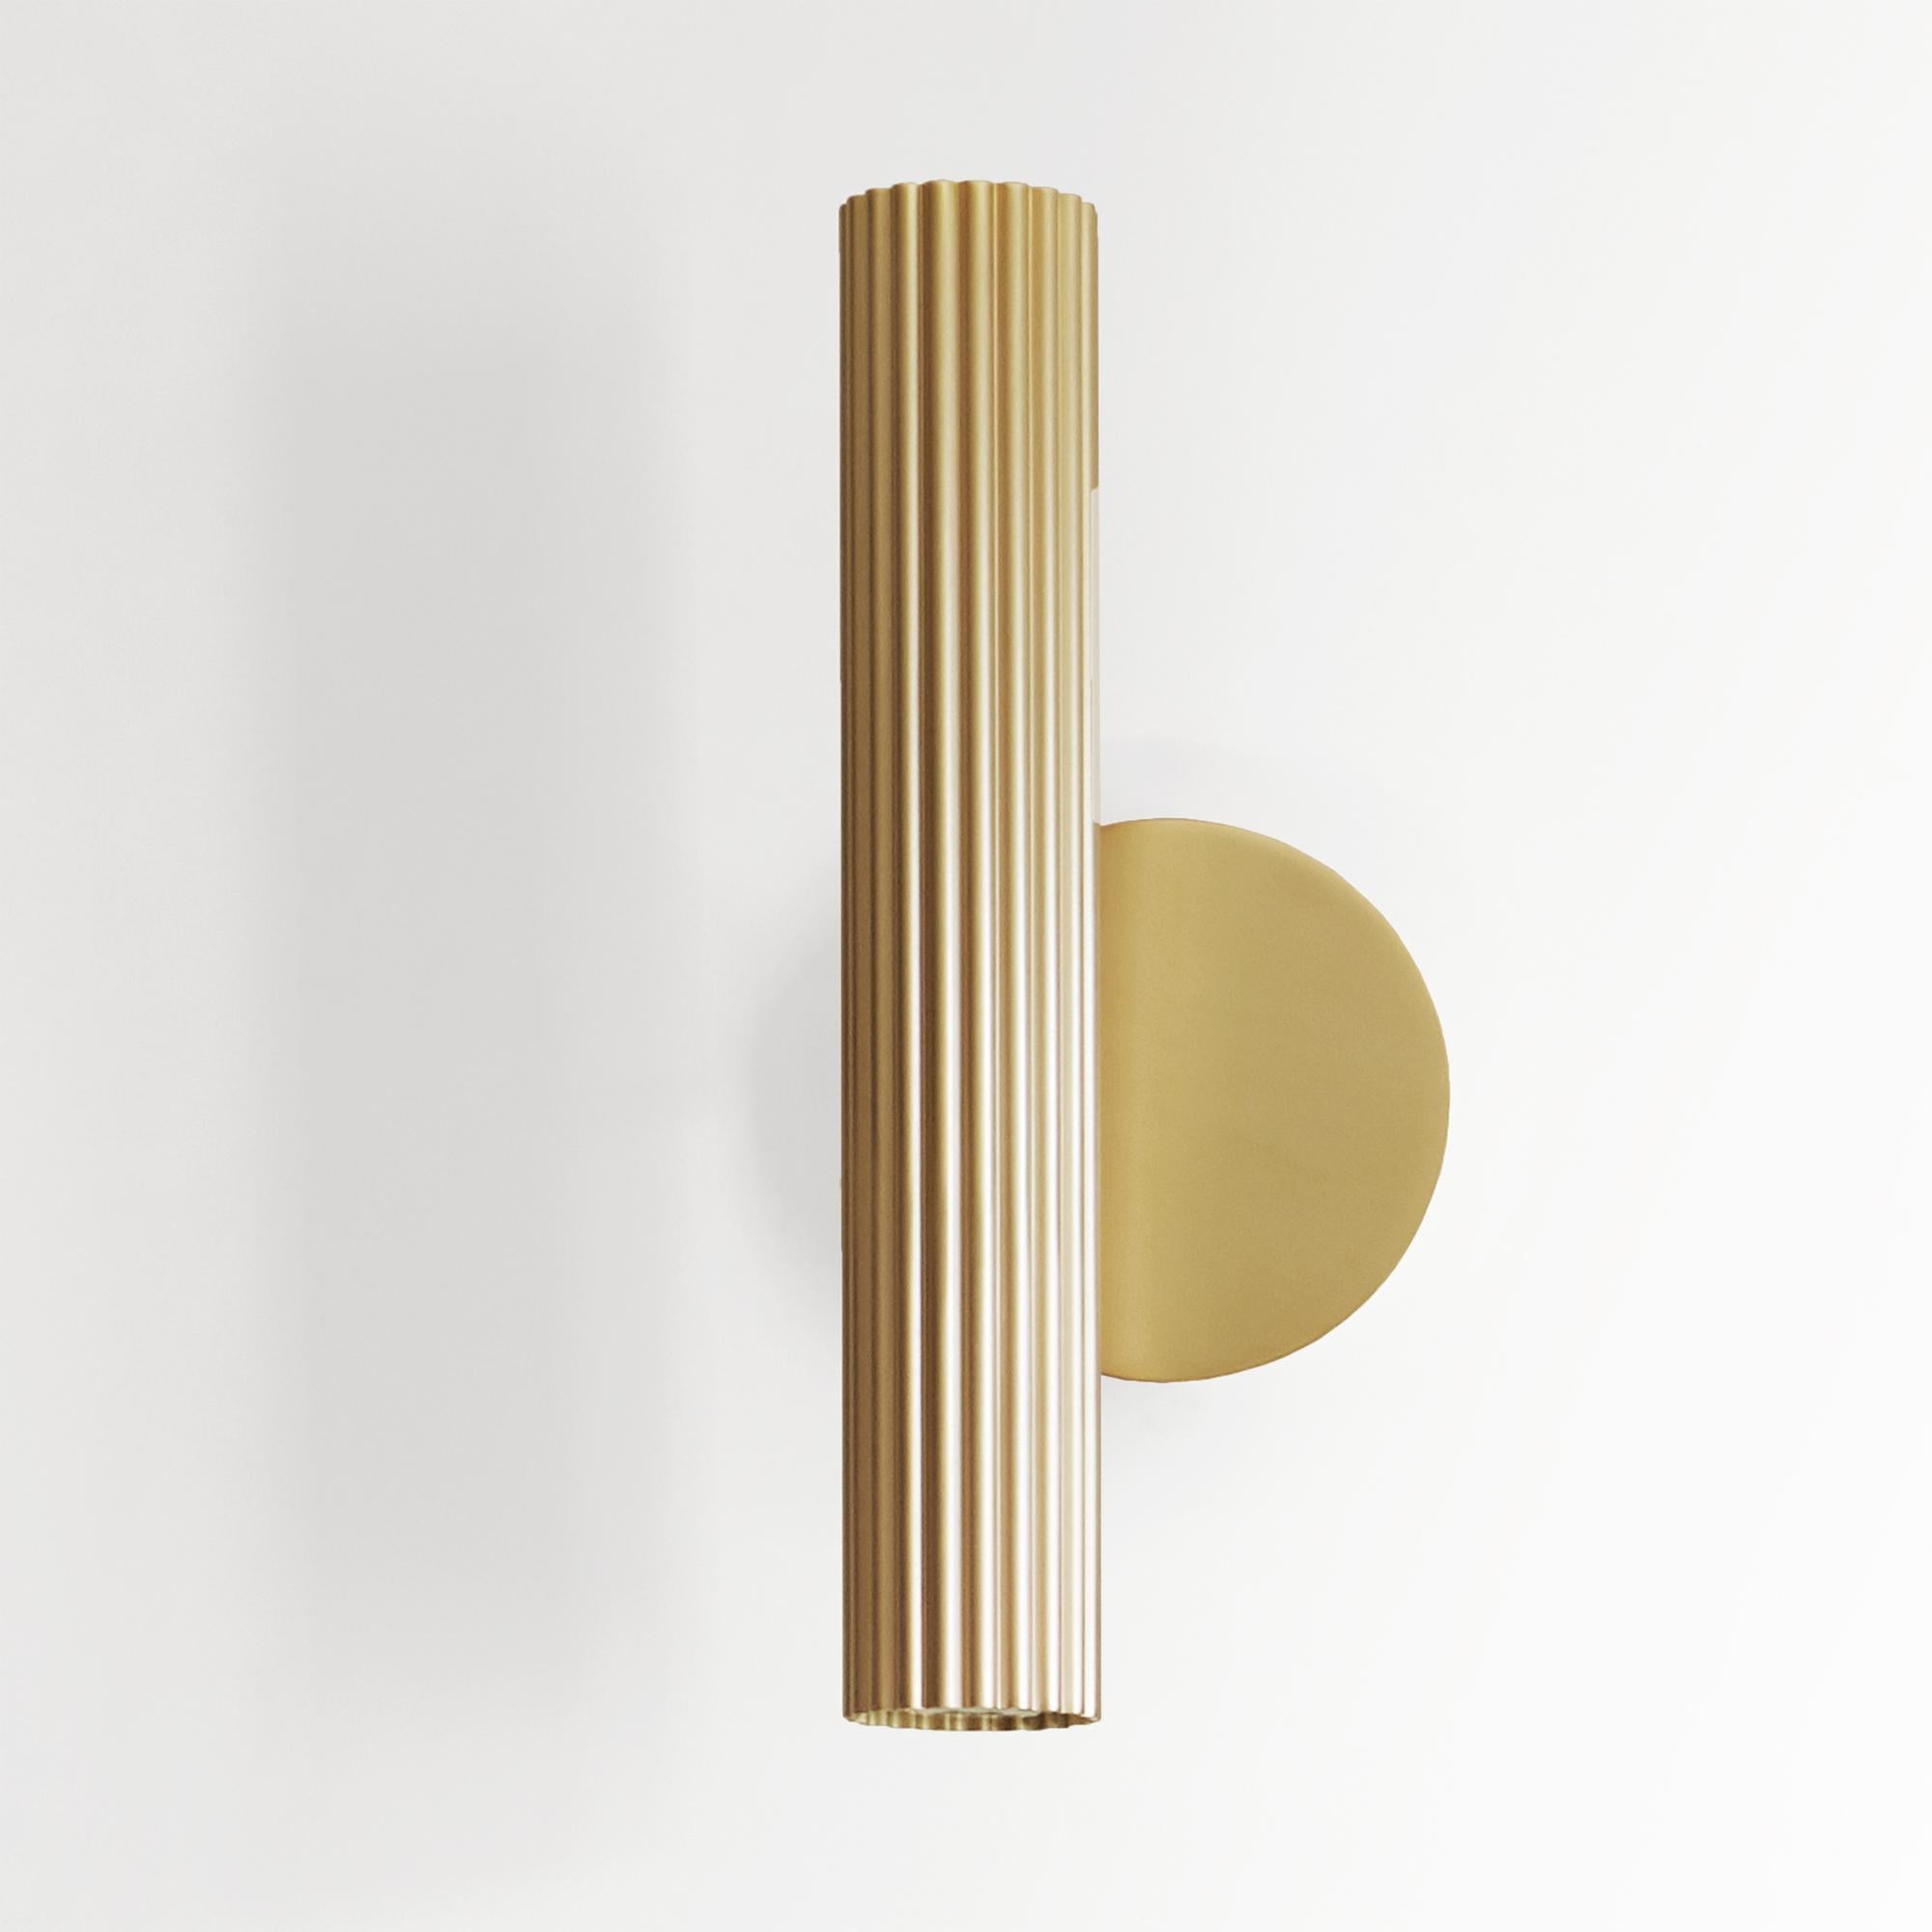 Lustrin wall lamp by Luce Tu
Dimensions: 35 x 12.6 cm
Materials: Brass 


LUCE TU is the story of two siblings in love with Milan, their hometown.
With the aim of enhancing the historical artisan tradition of the city without losing its past